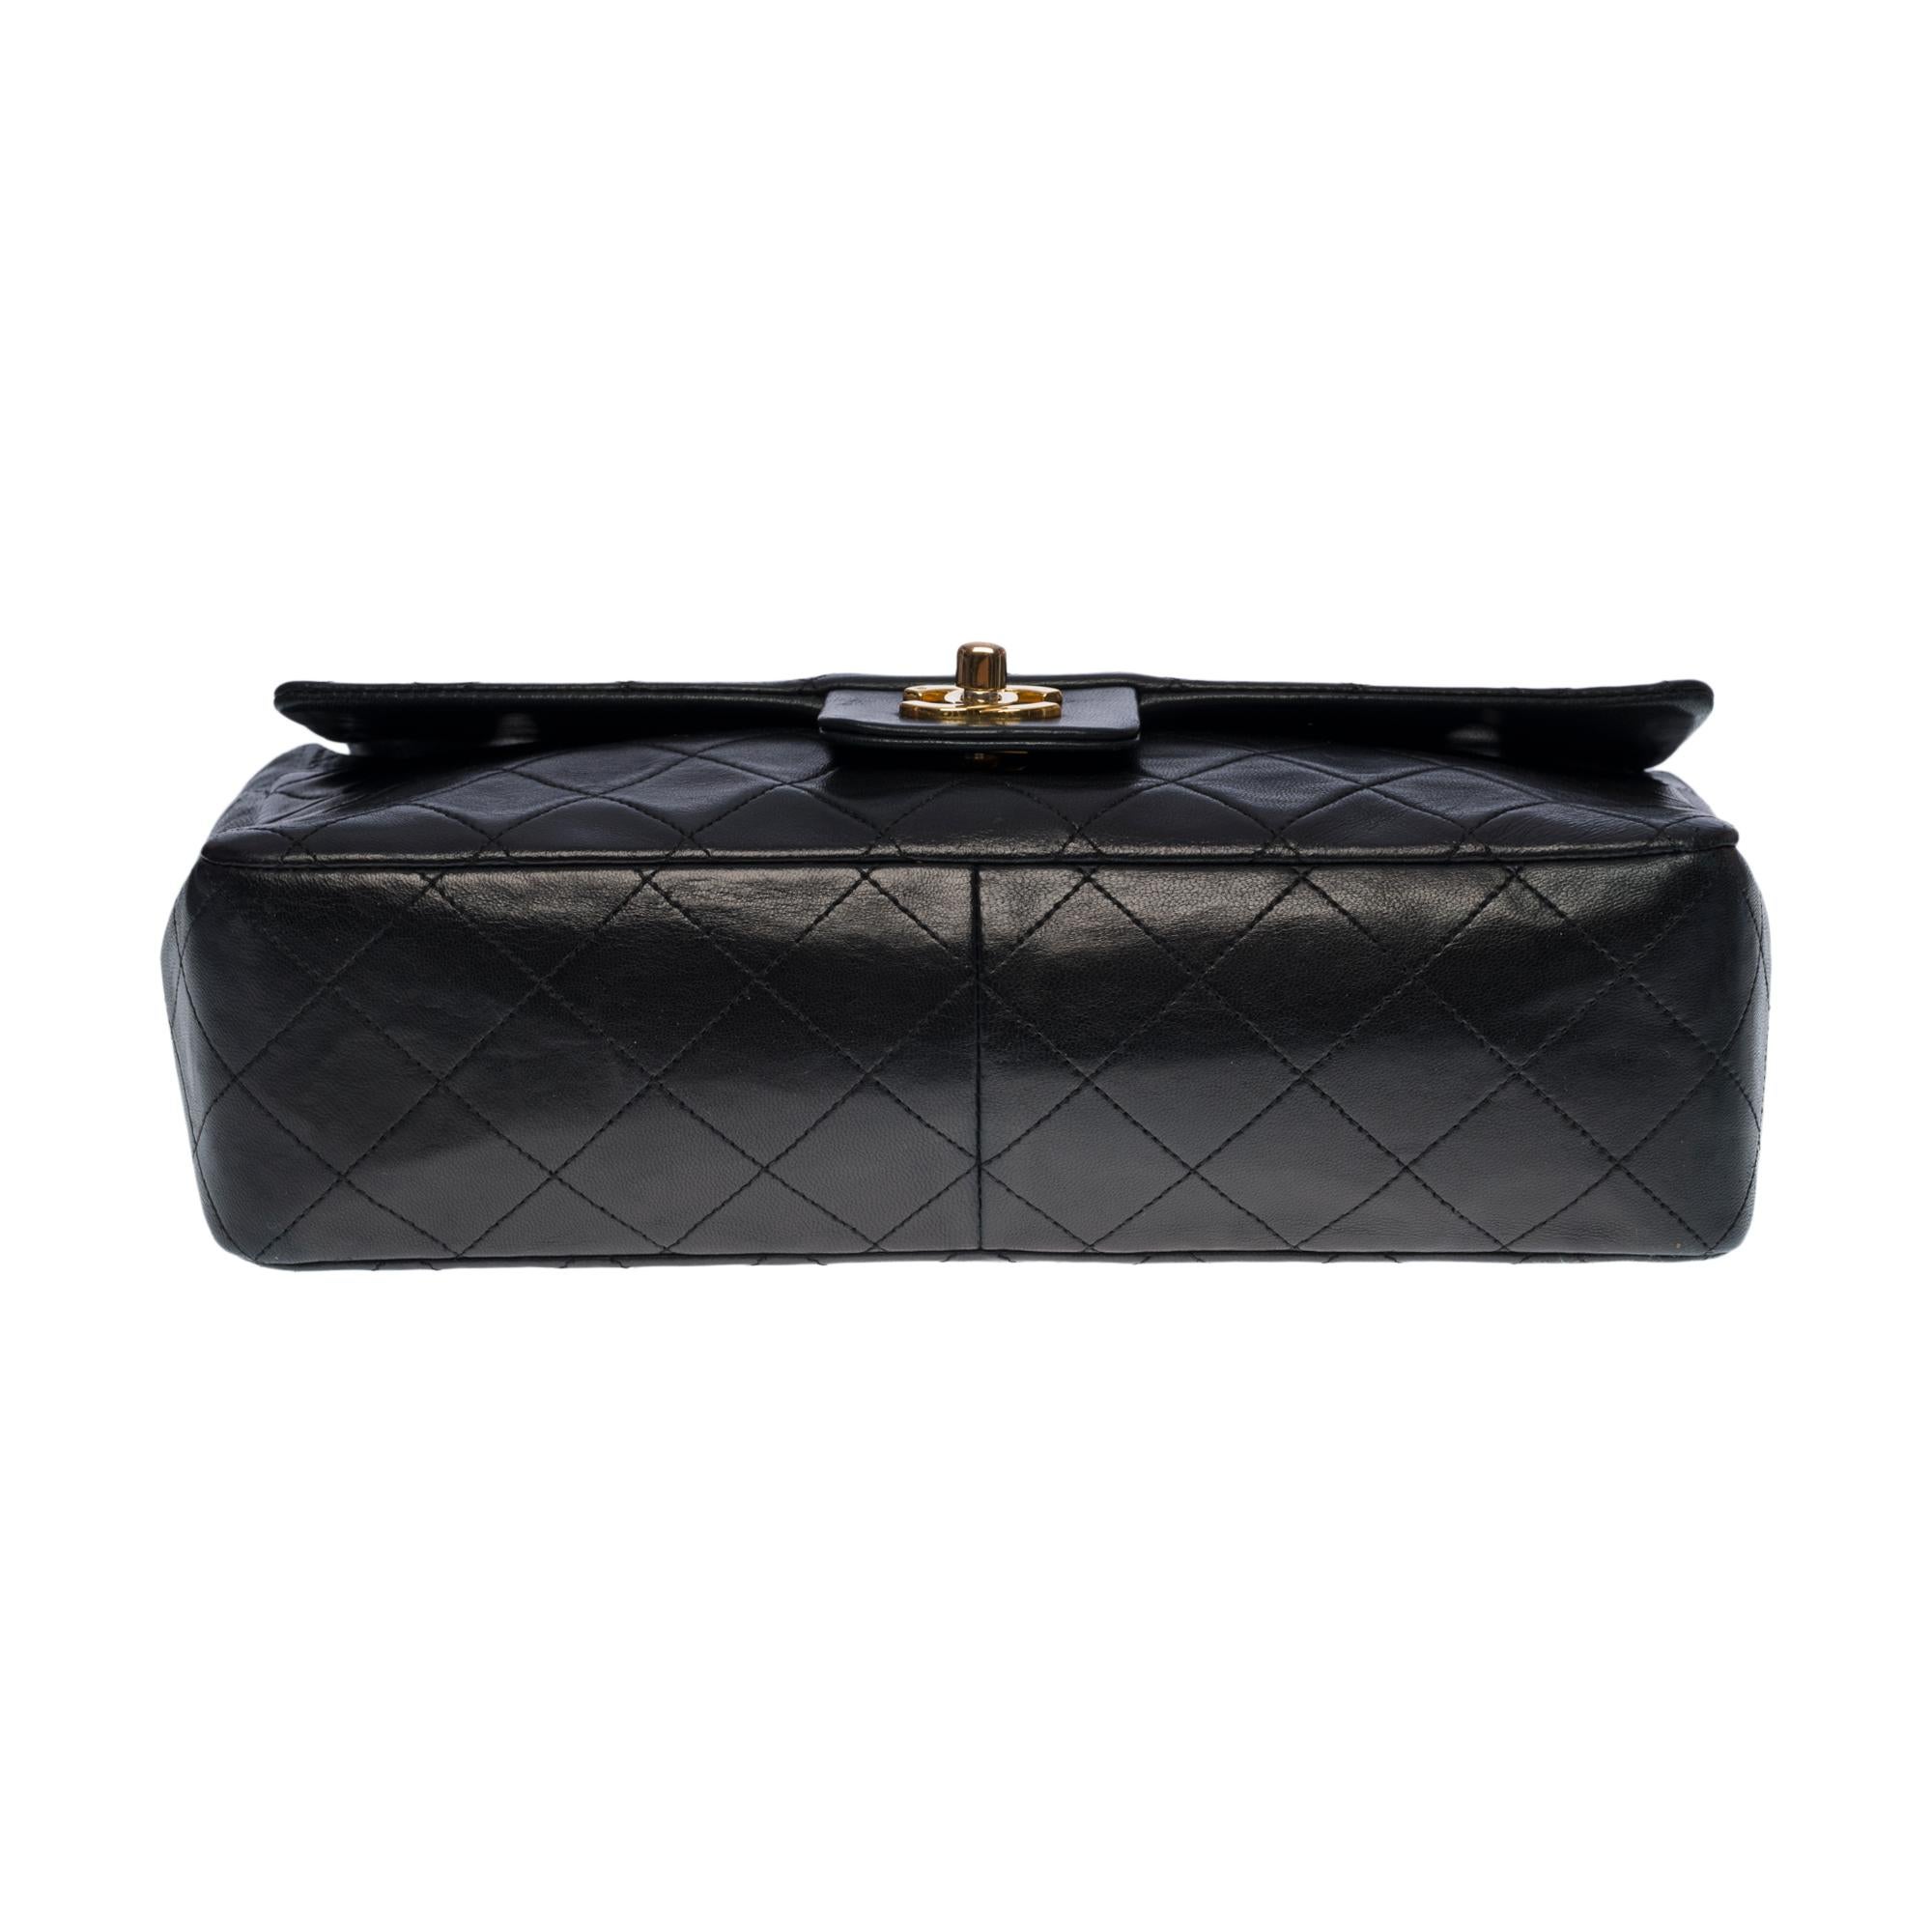 Chanel Timeless/Classic Flap shoulder bag in black quilted lambskin, GHW 4